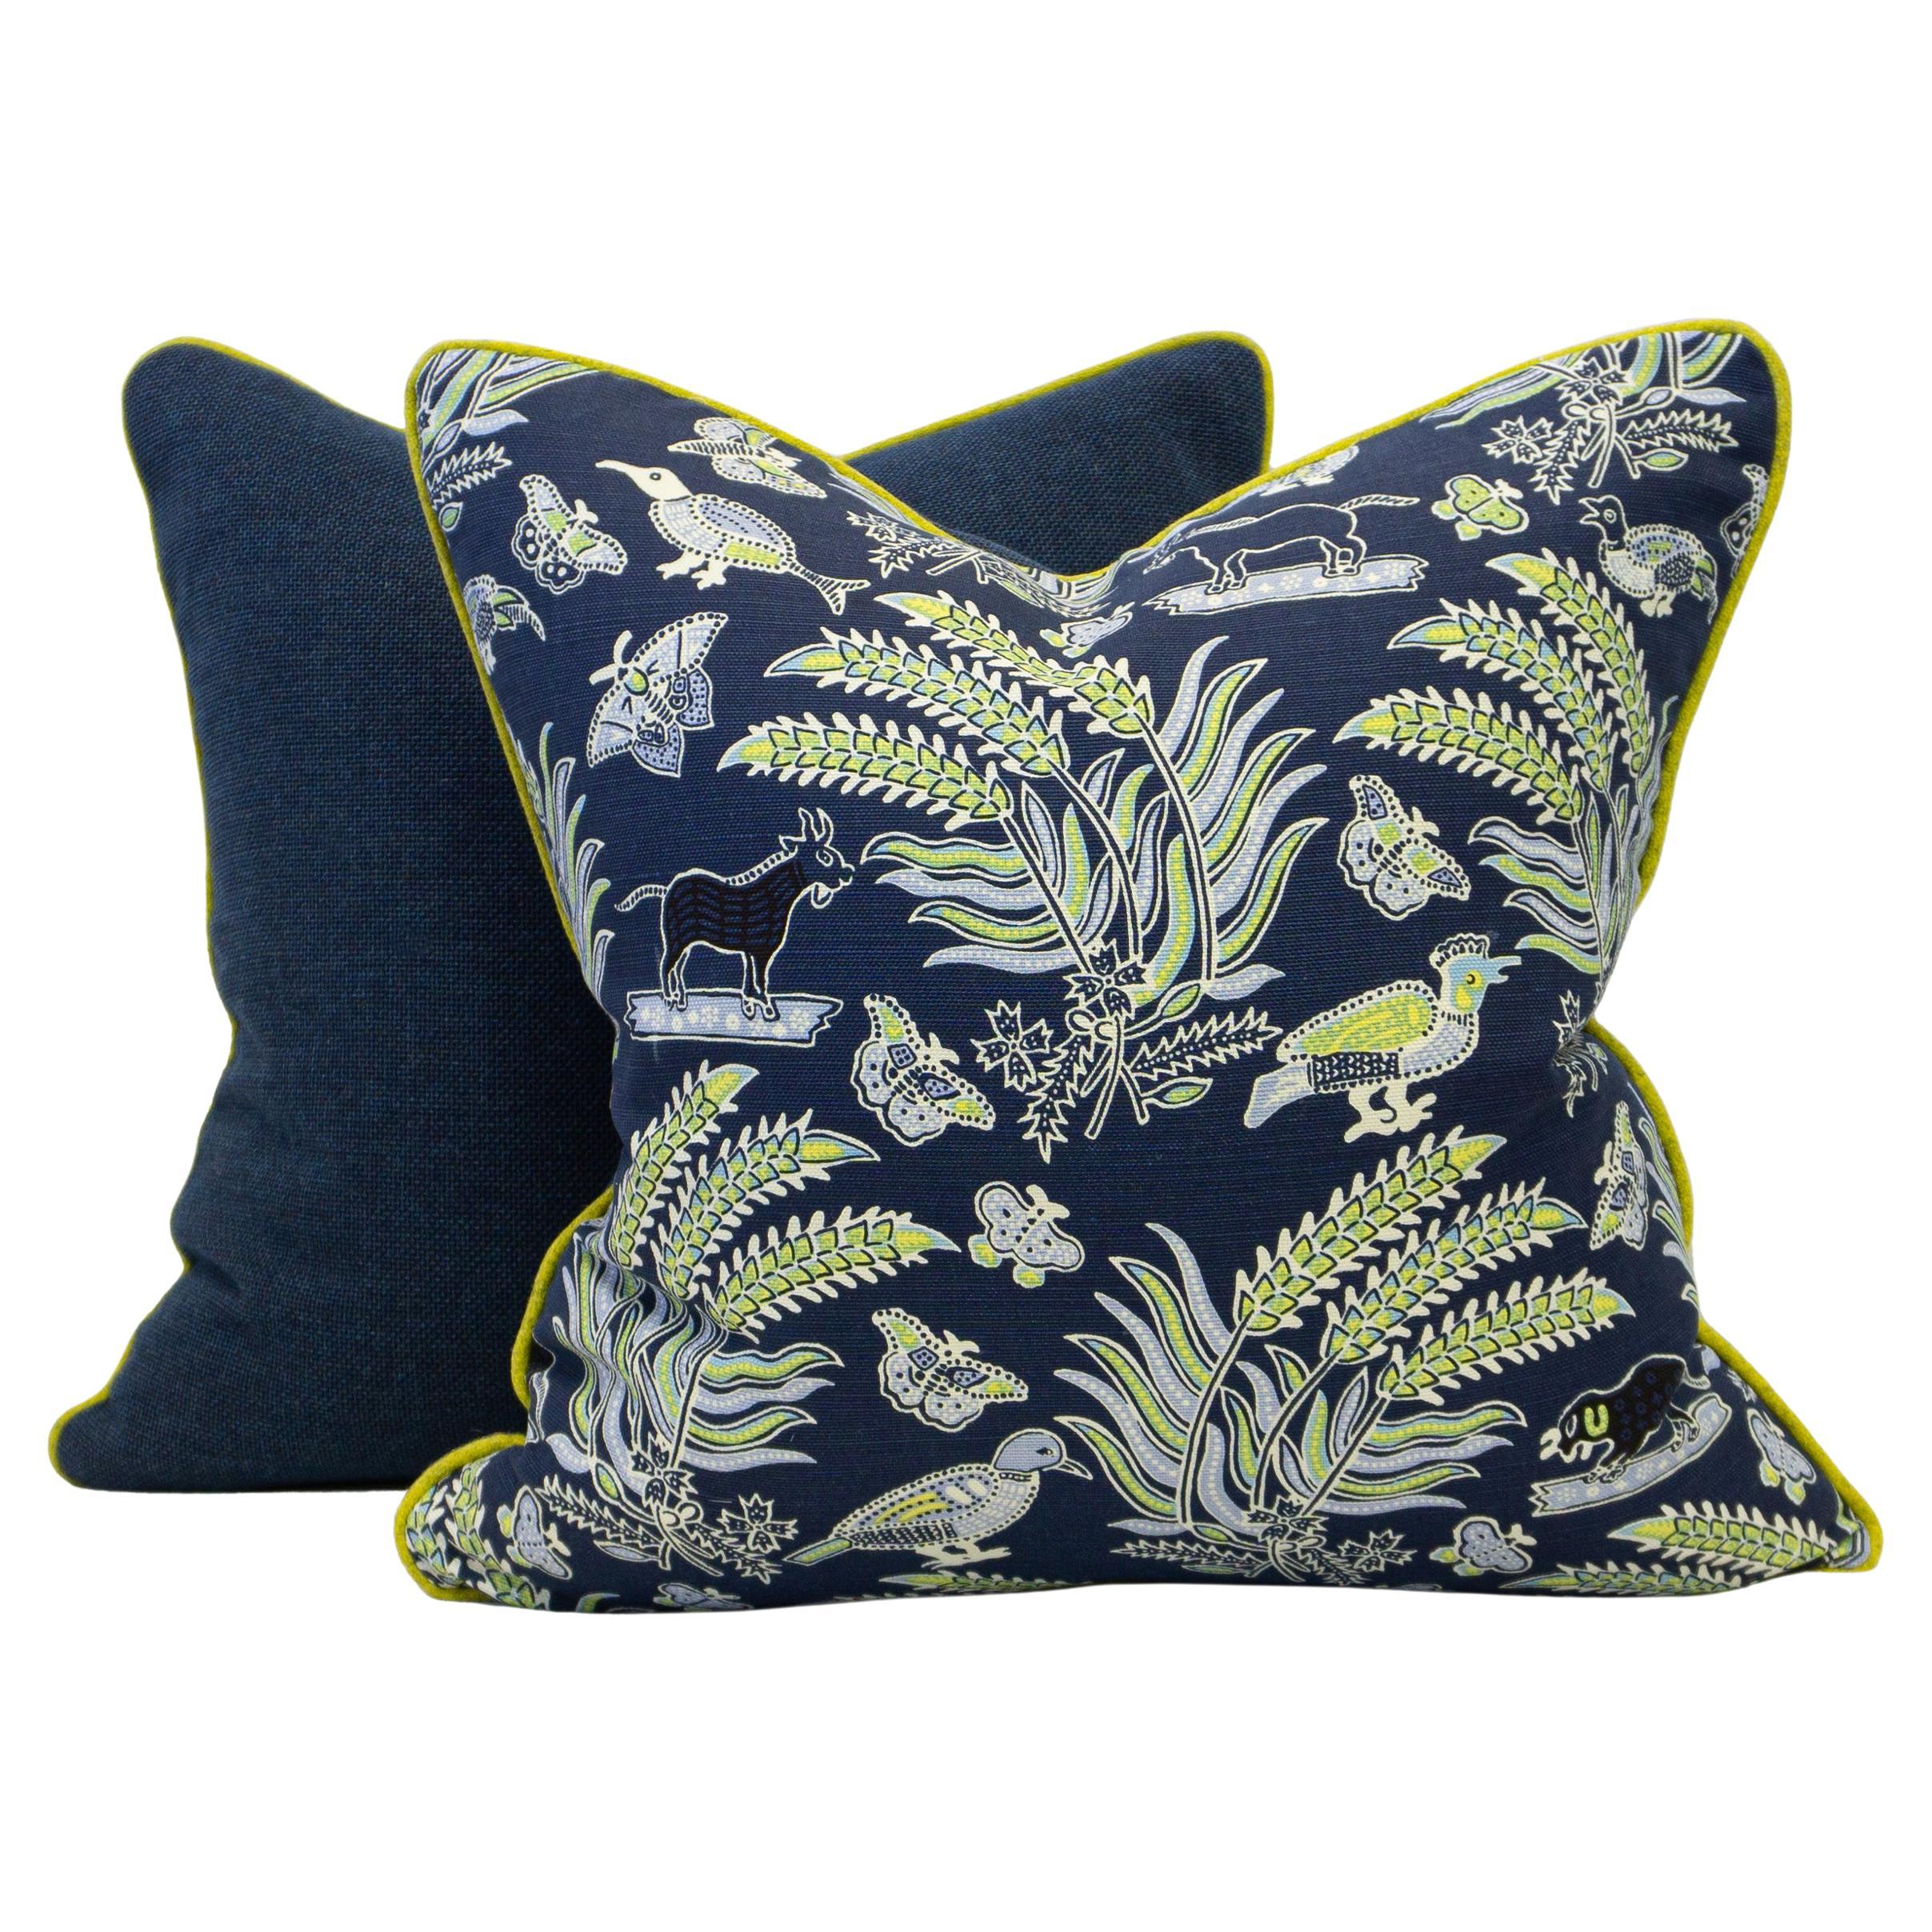 Navy Blue Printed Linen Fabric with Yellow Trim Square Pillows